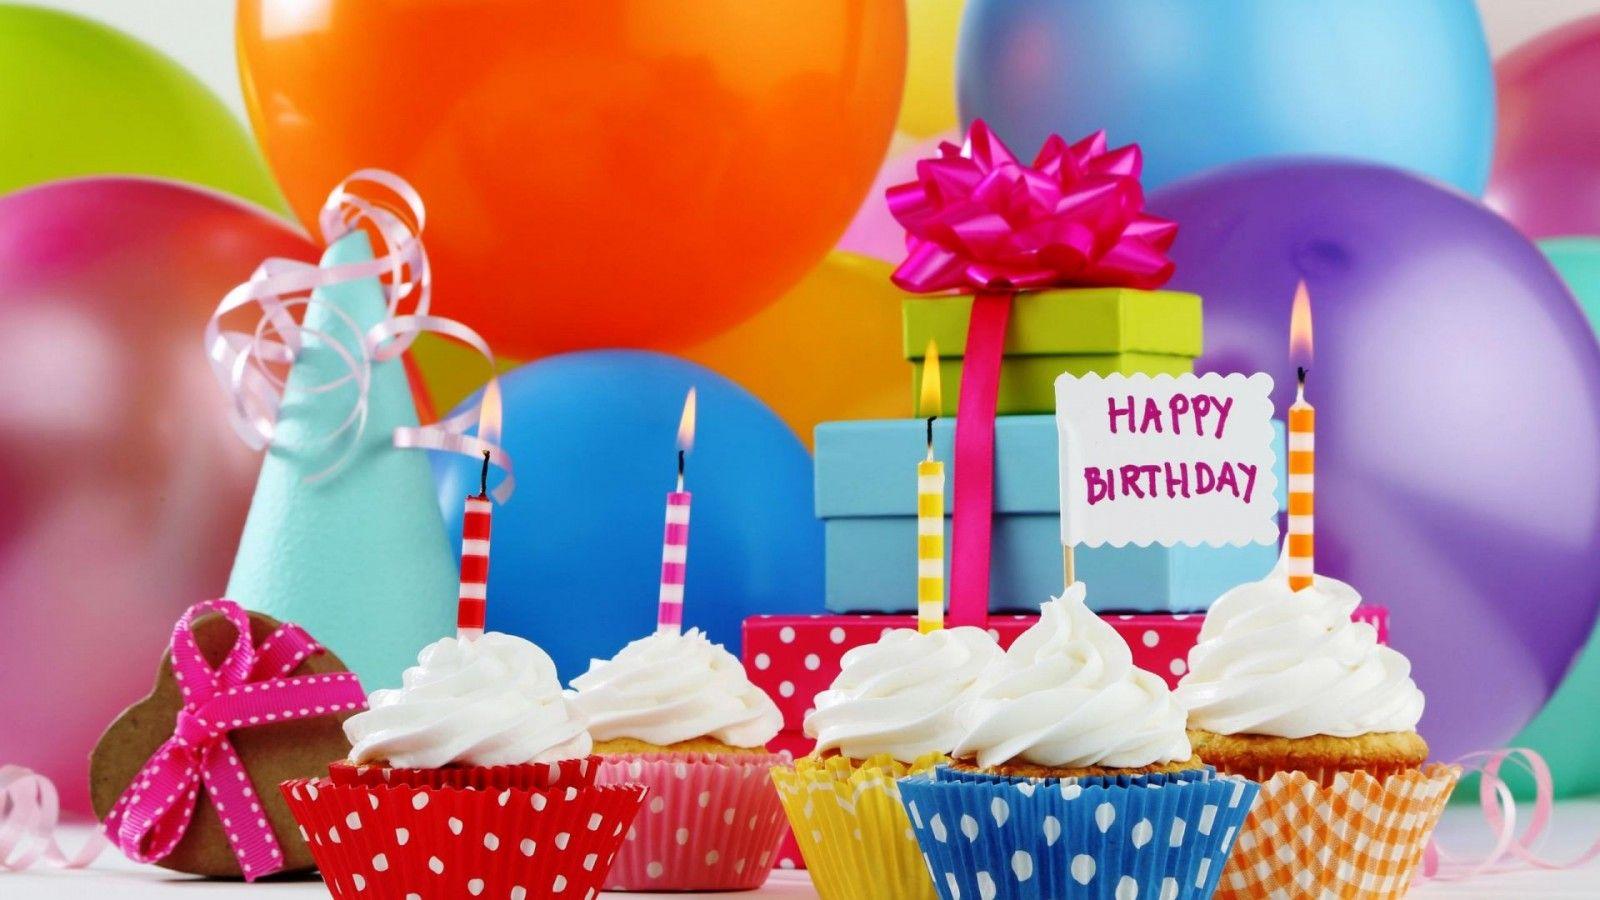 Free Birthday Wallpaper Download for Mobile Happy Birthday Balloon